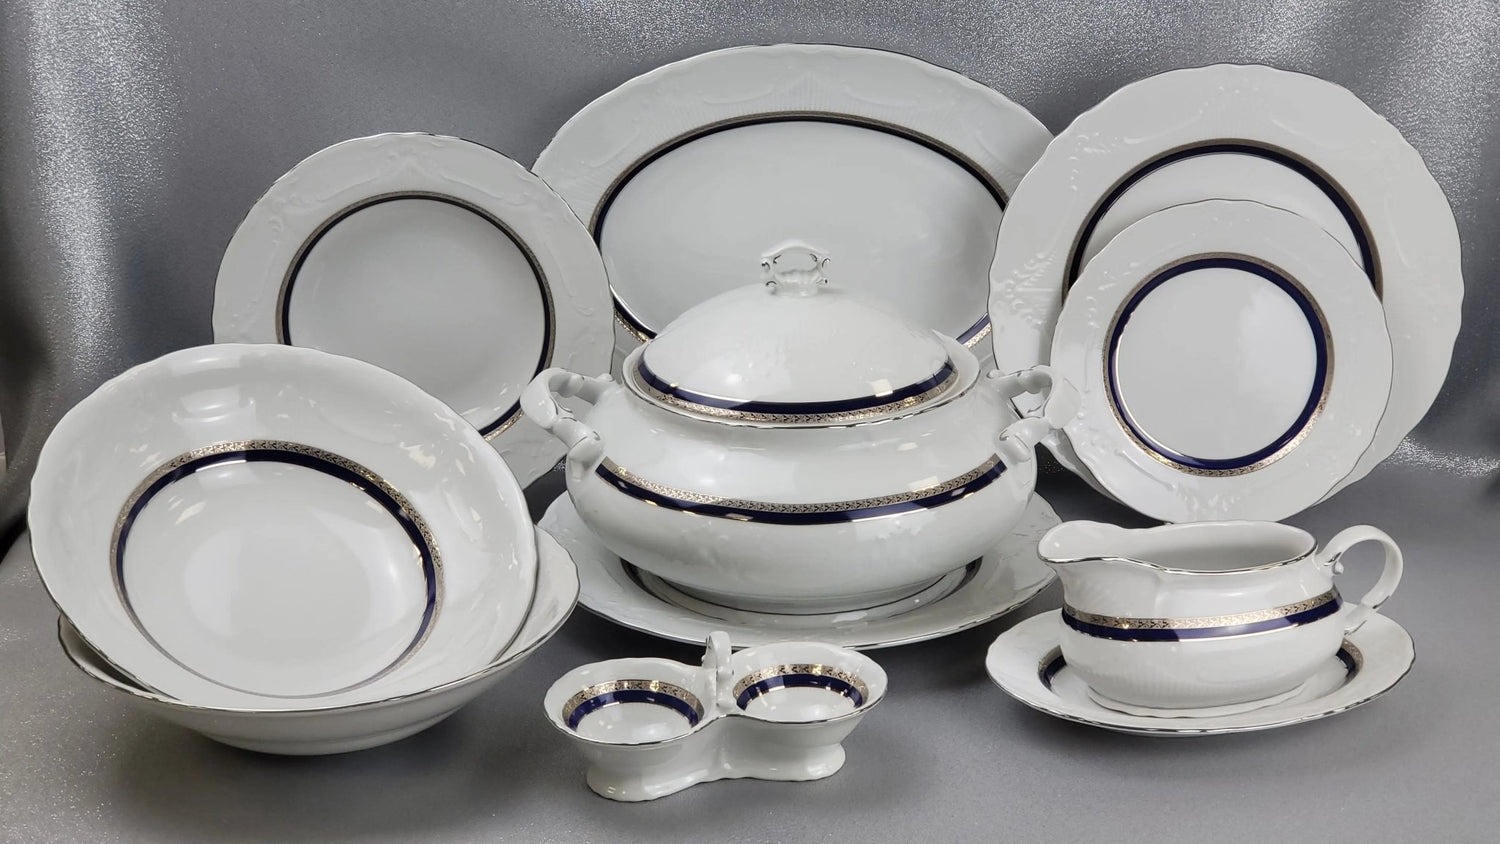 The porcelain dinner set for 6 persons, Vicomte, "Platina line" by Thun 1794 a.s.